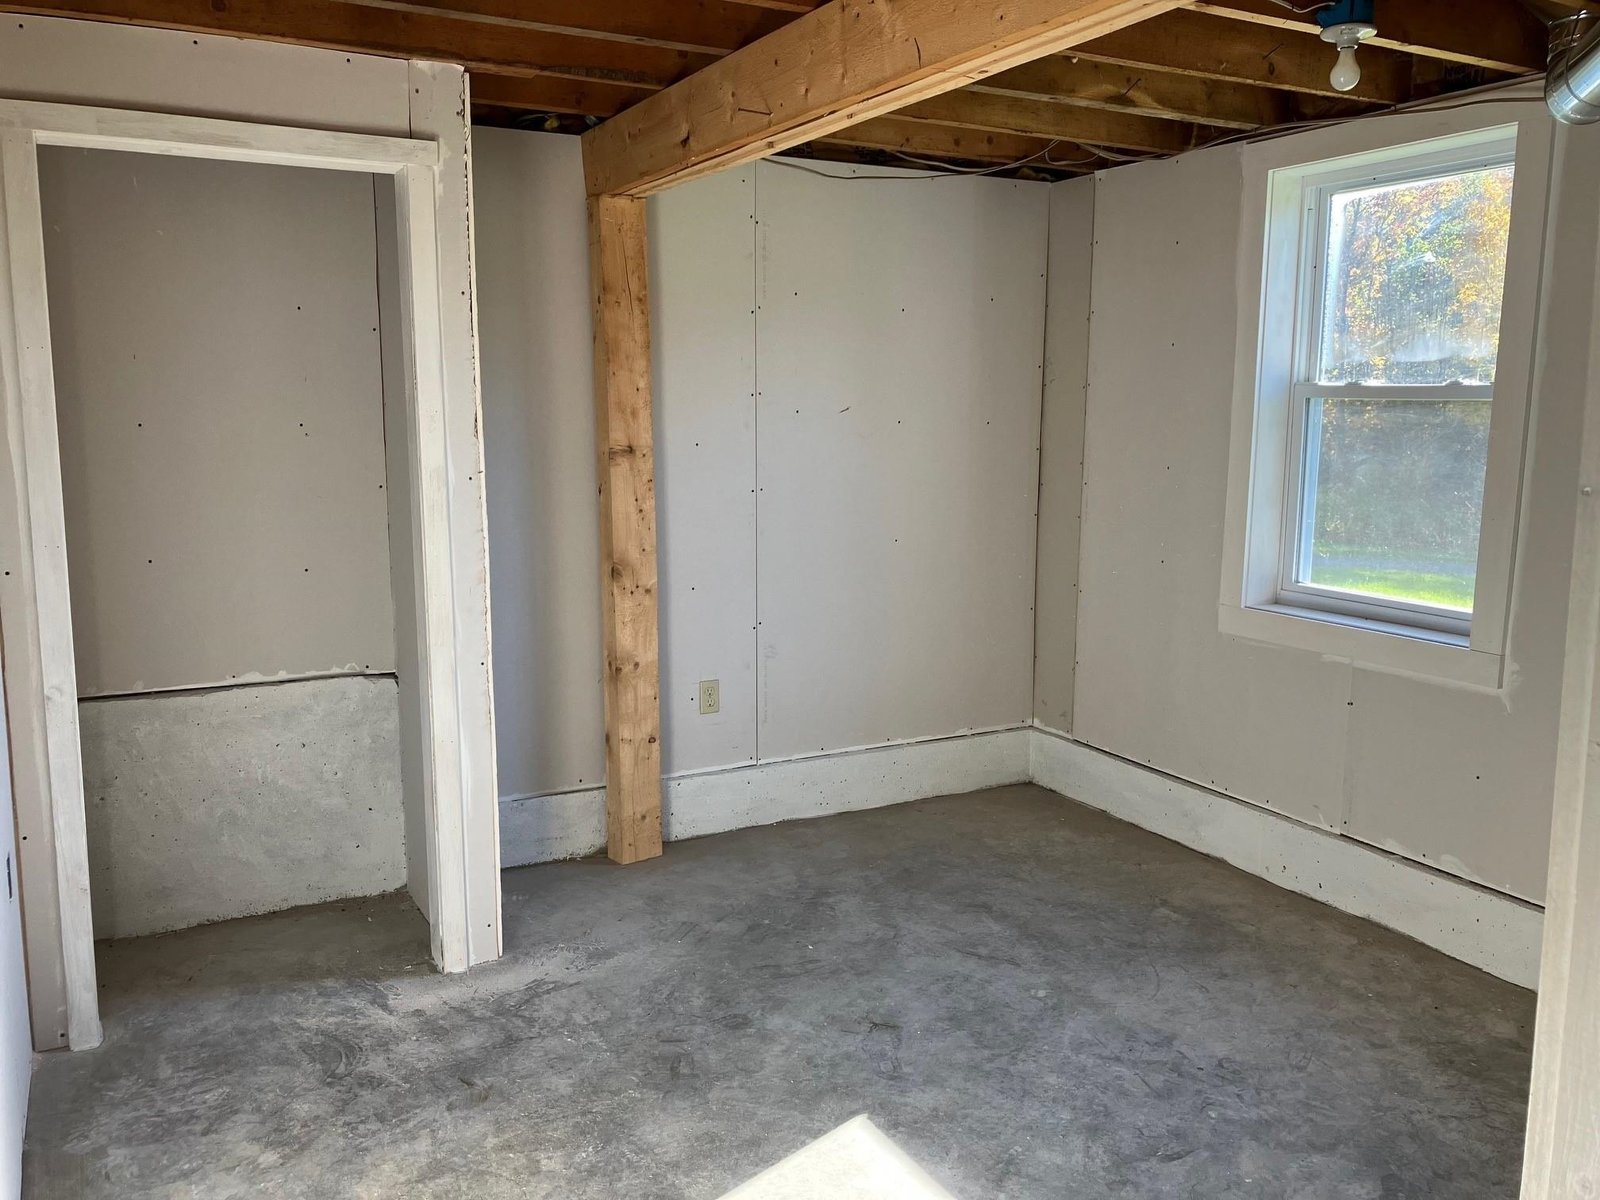 Space in basement for office/bedroom